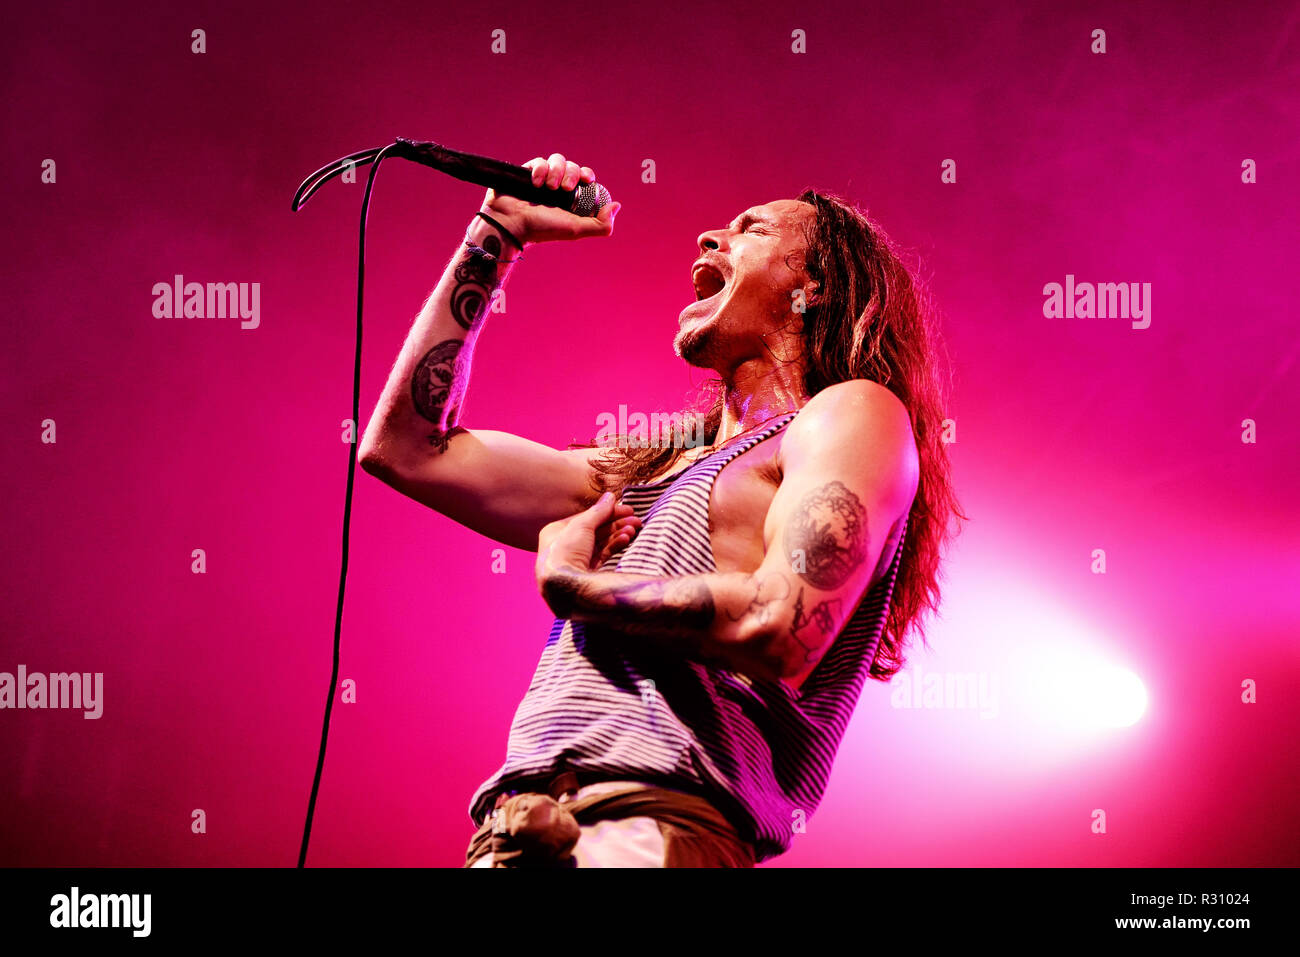 BARCELONA - AUG 26: Incubus (heavy metal rock band) perform in concert at Razzmatazz stage on August 26, 2018 in Barcelona, Spain. Stock Photo